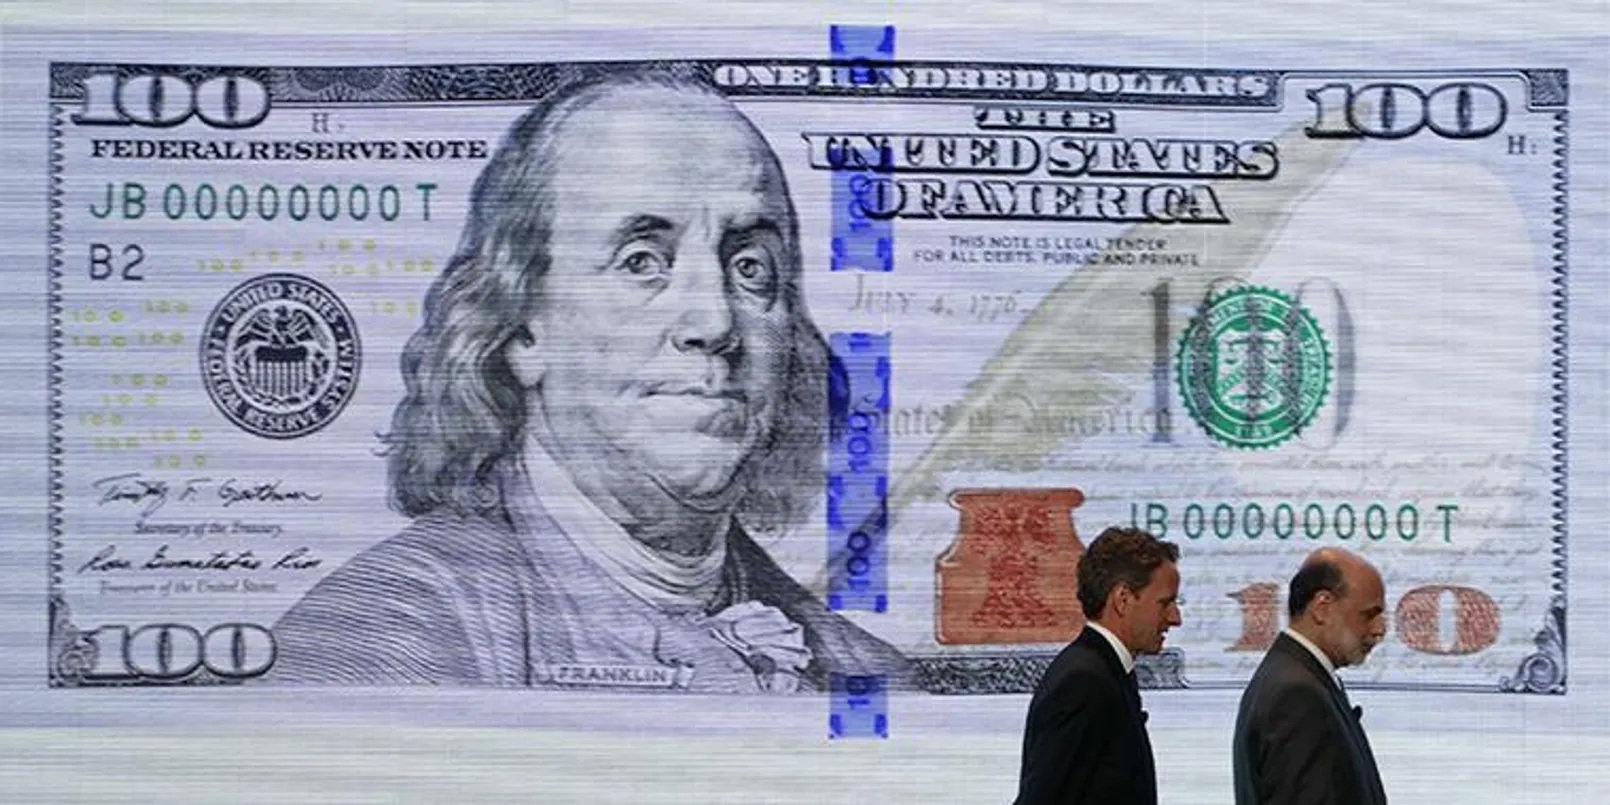 Monetary Policy Central Banks Supporting 100 Dollar Bill 760x380.jpg